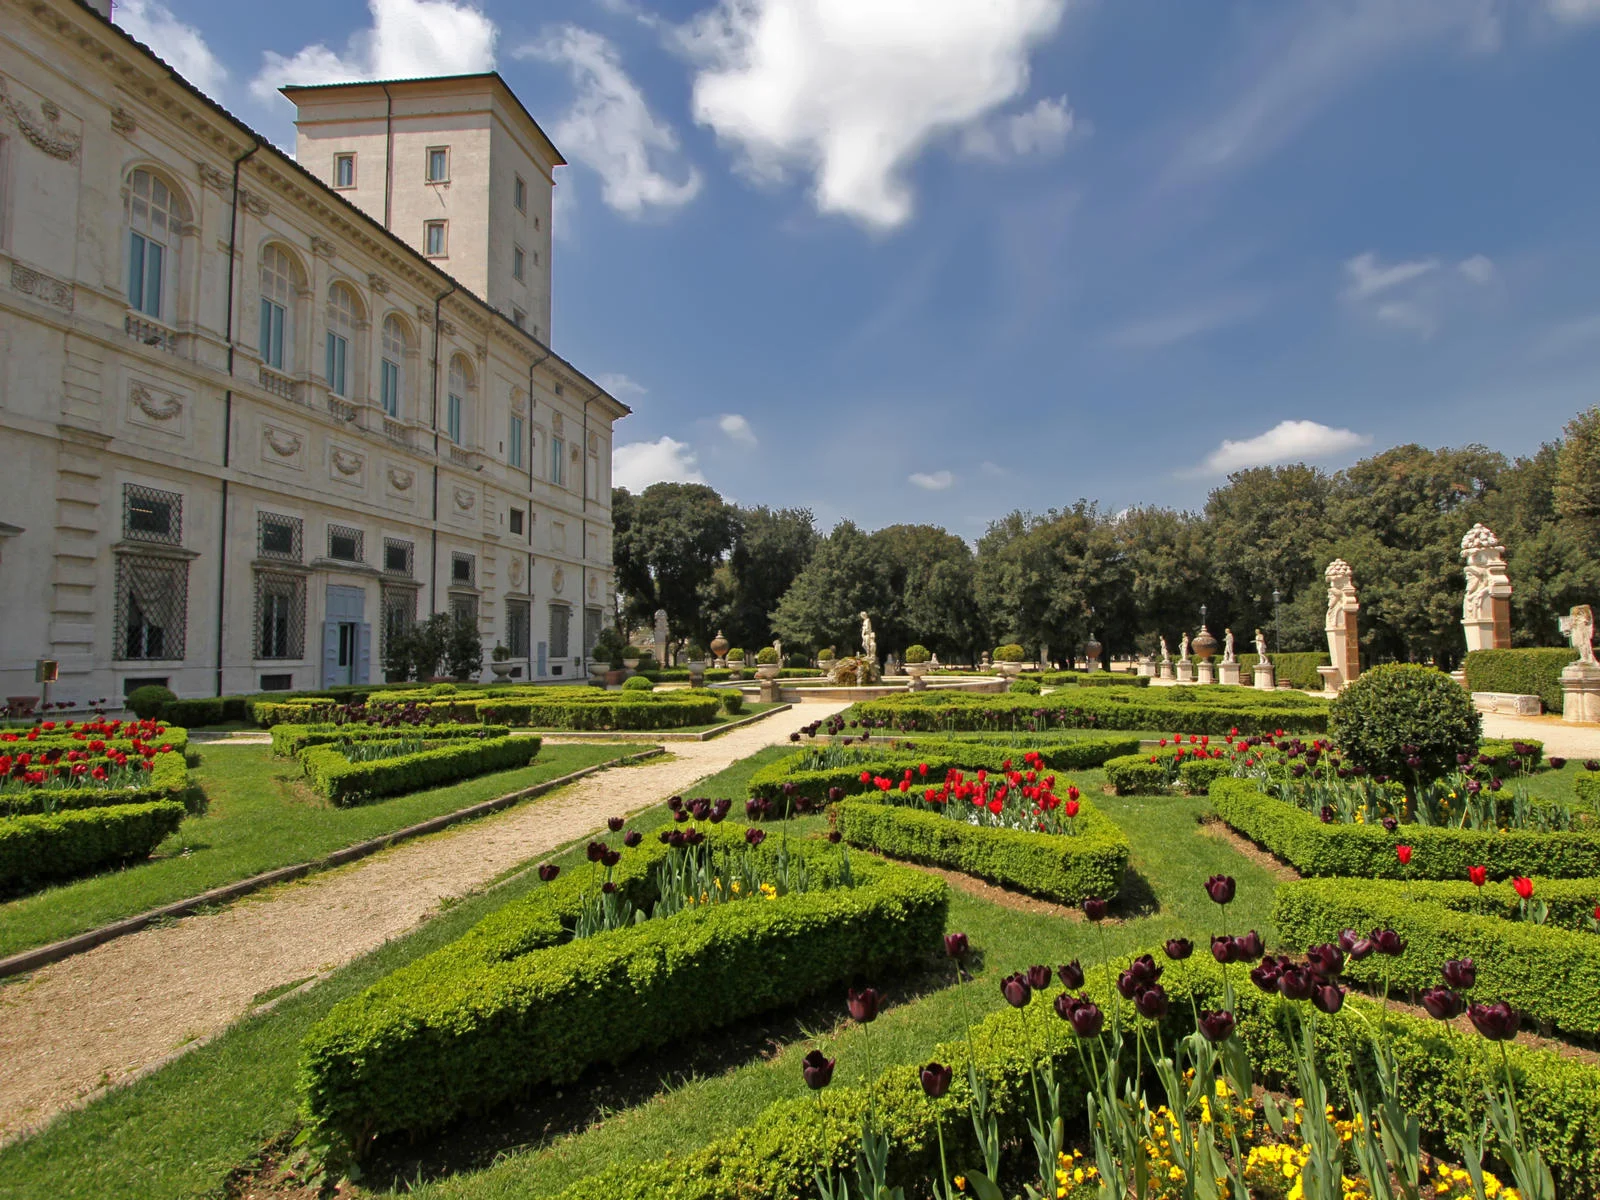 Villa Borghese, one of the best places to stay in Rome, pictured on a sunny day